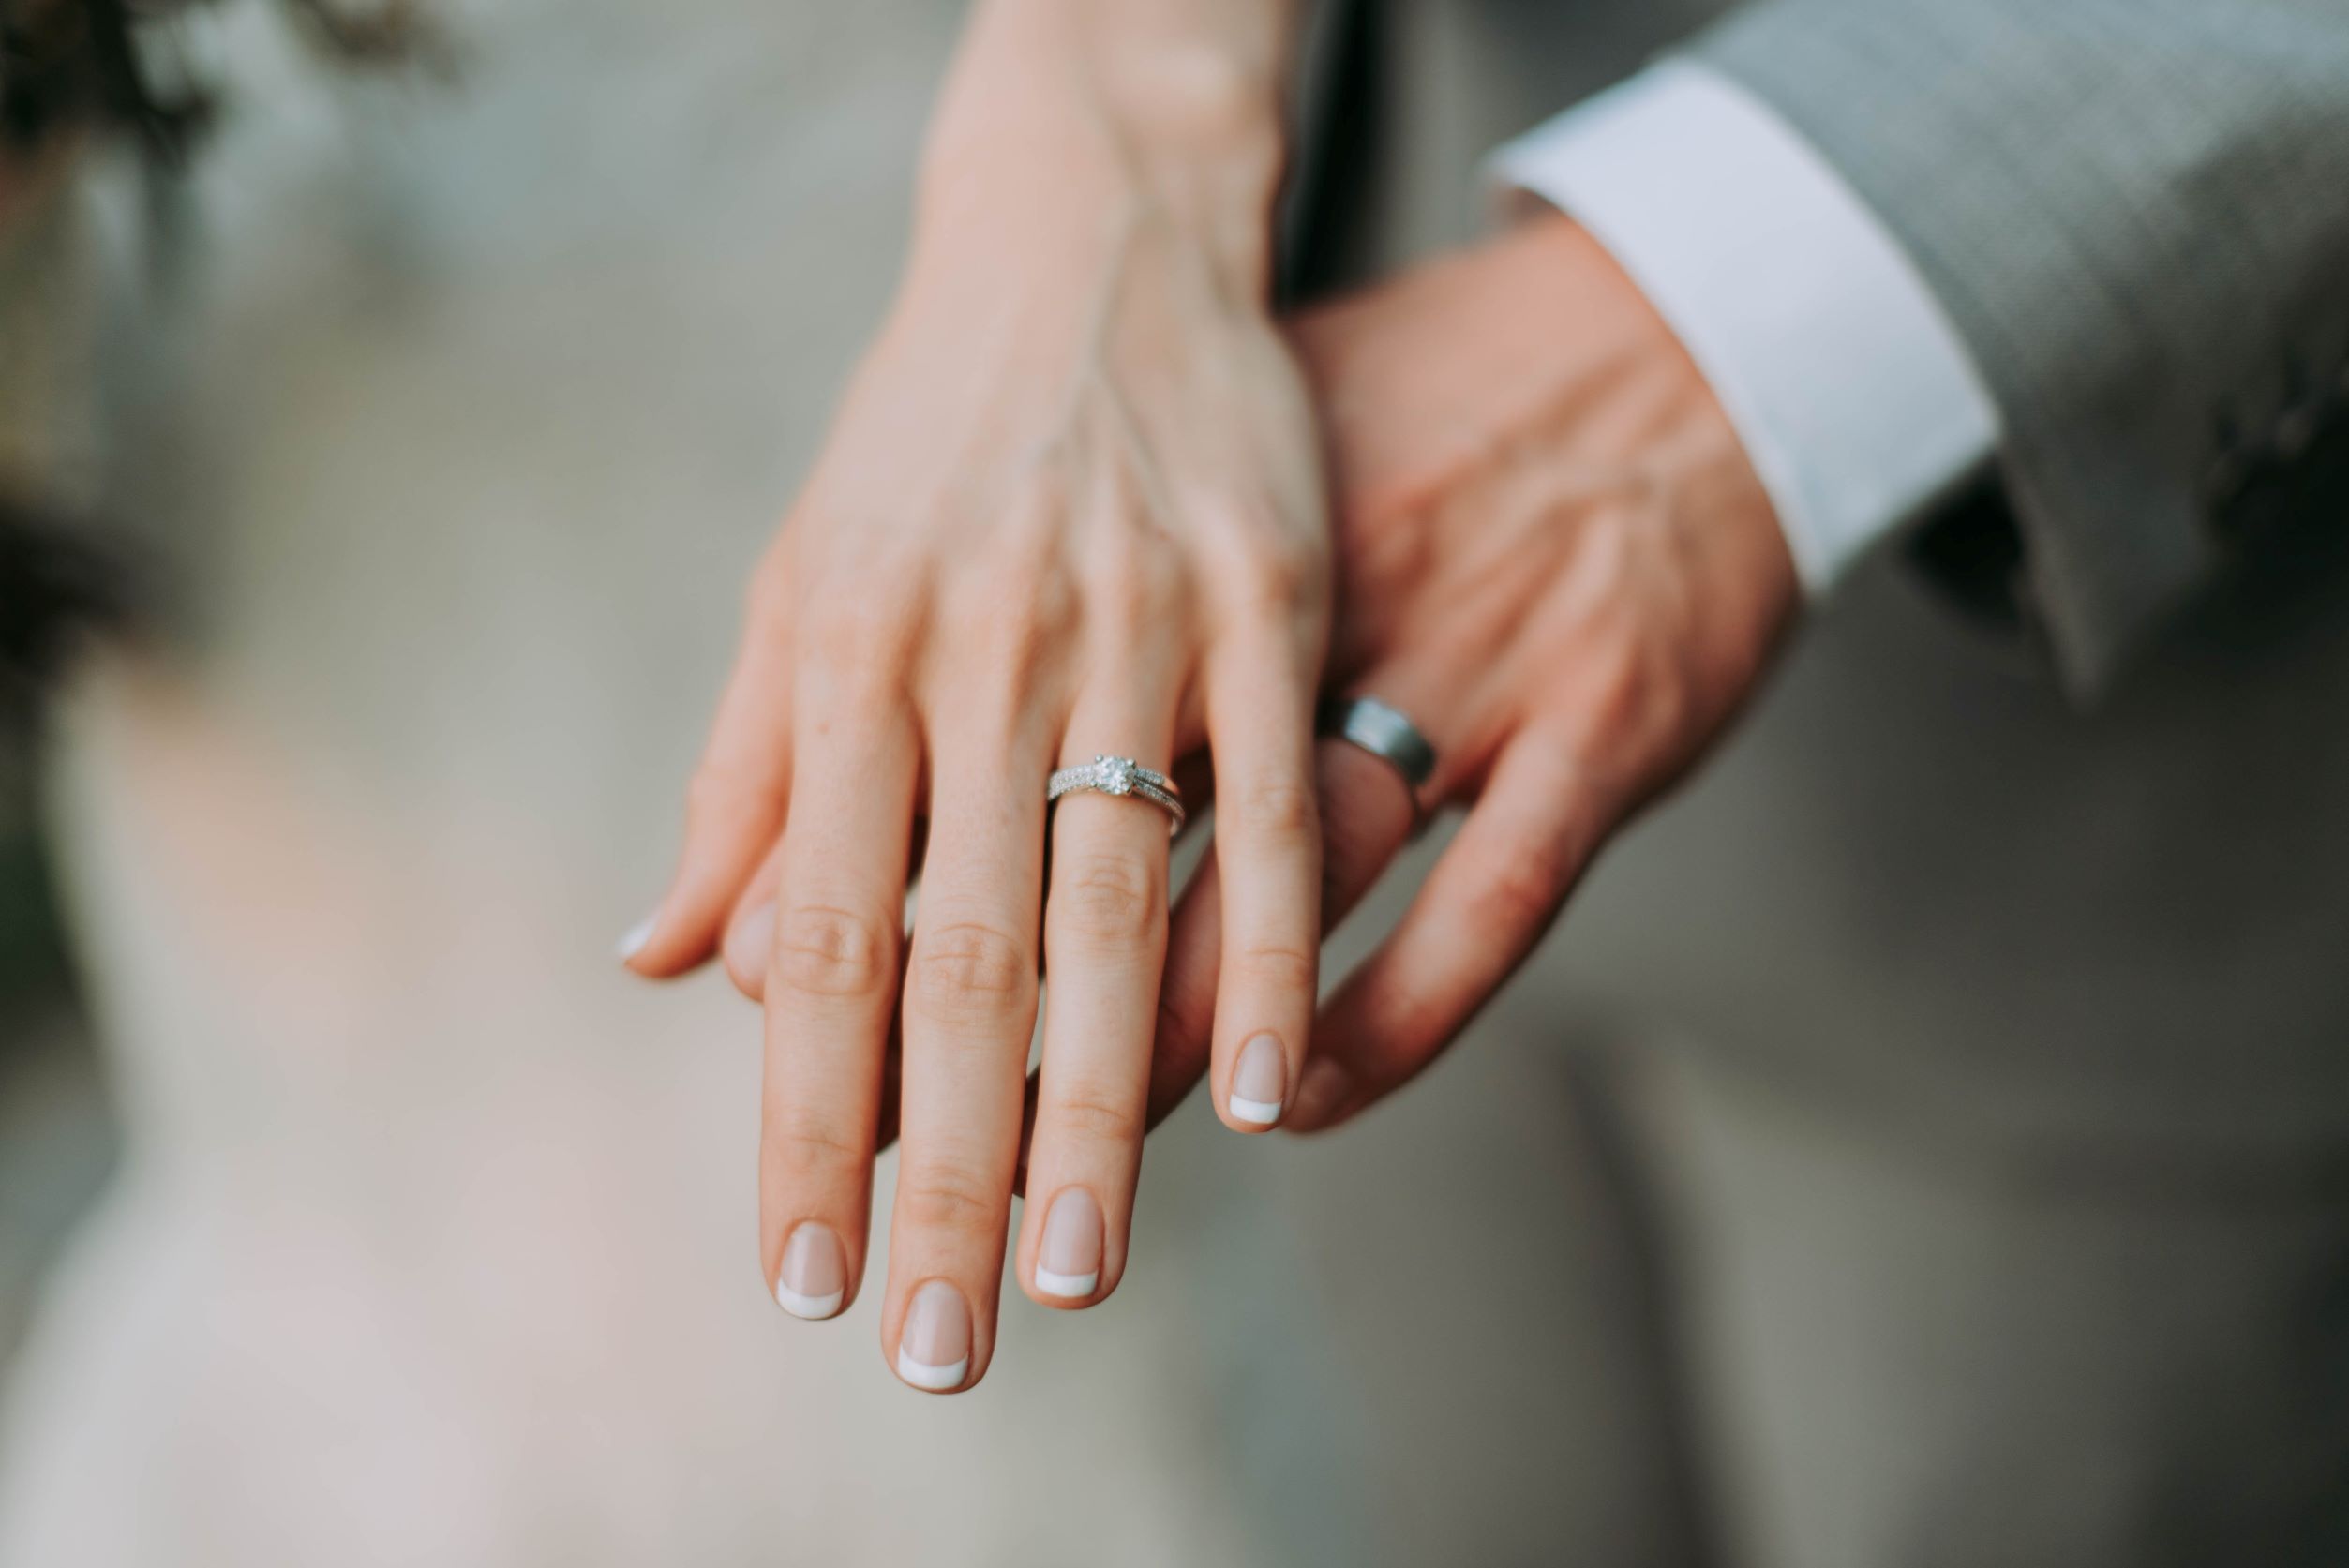 Things to include in a prenuptial agreement